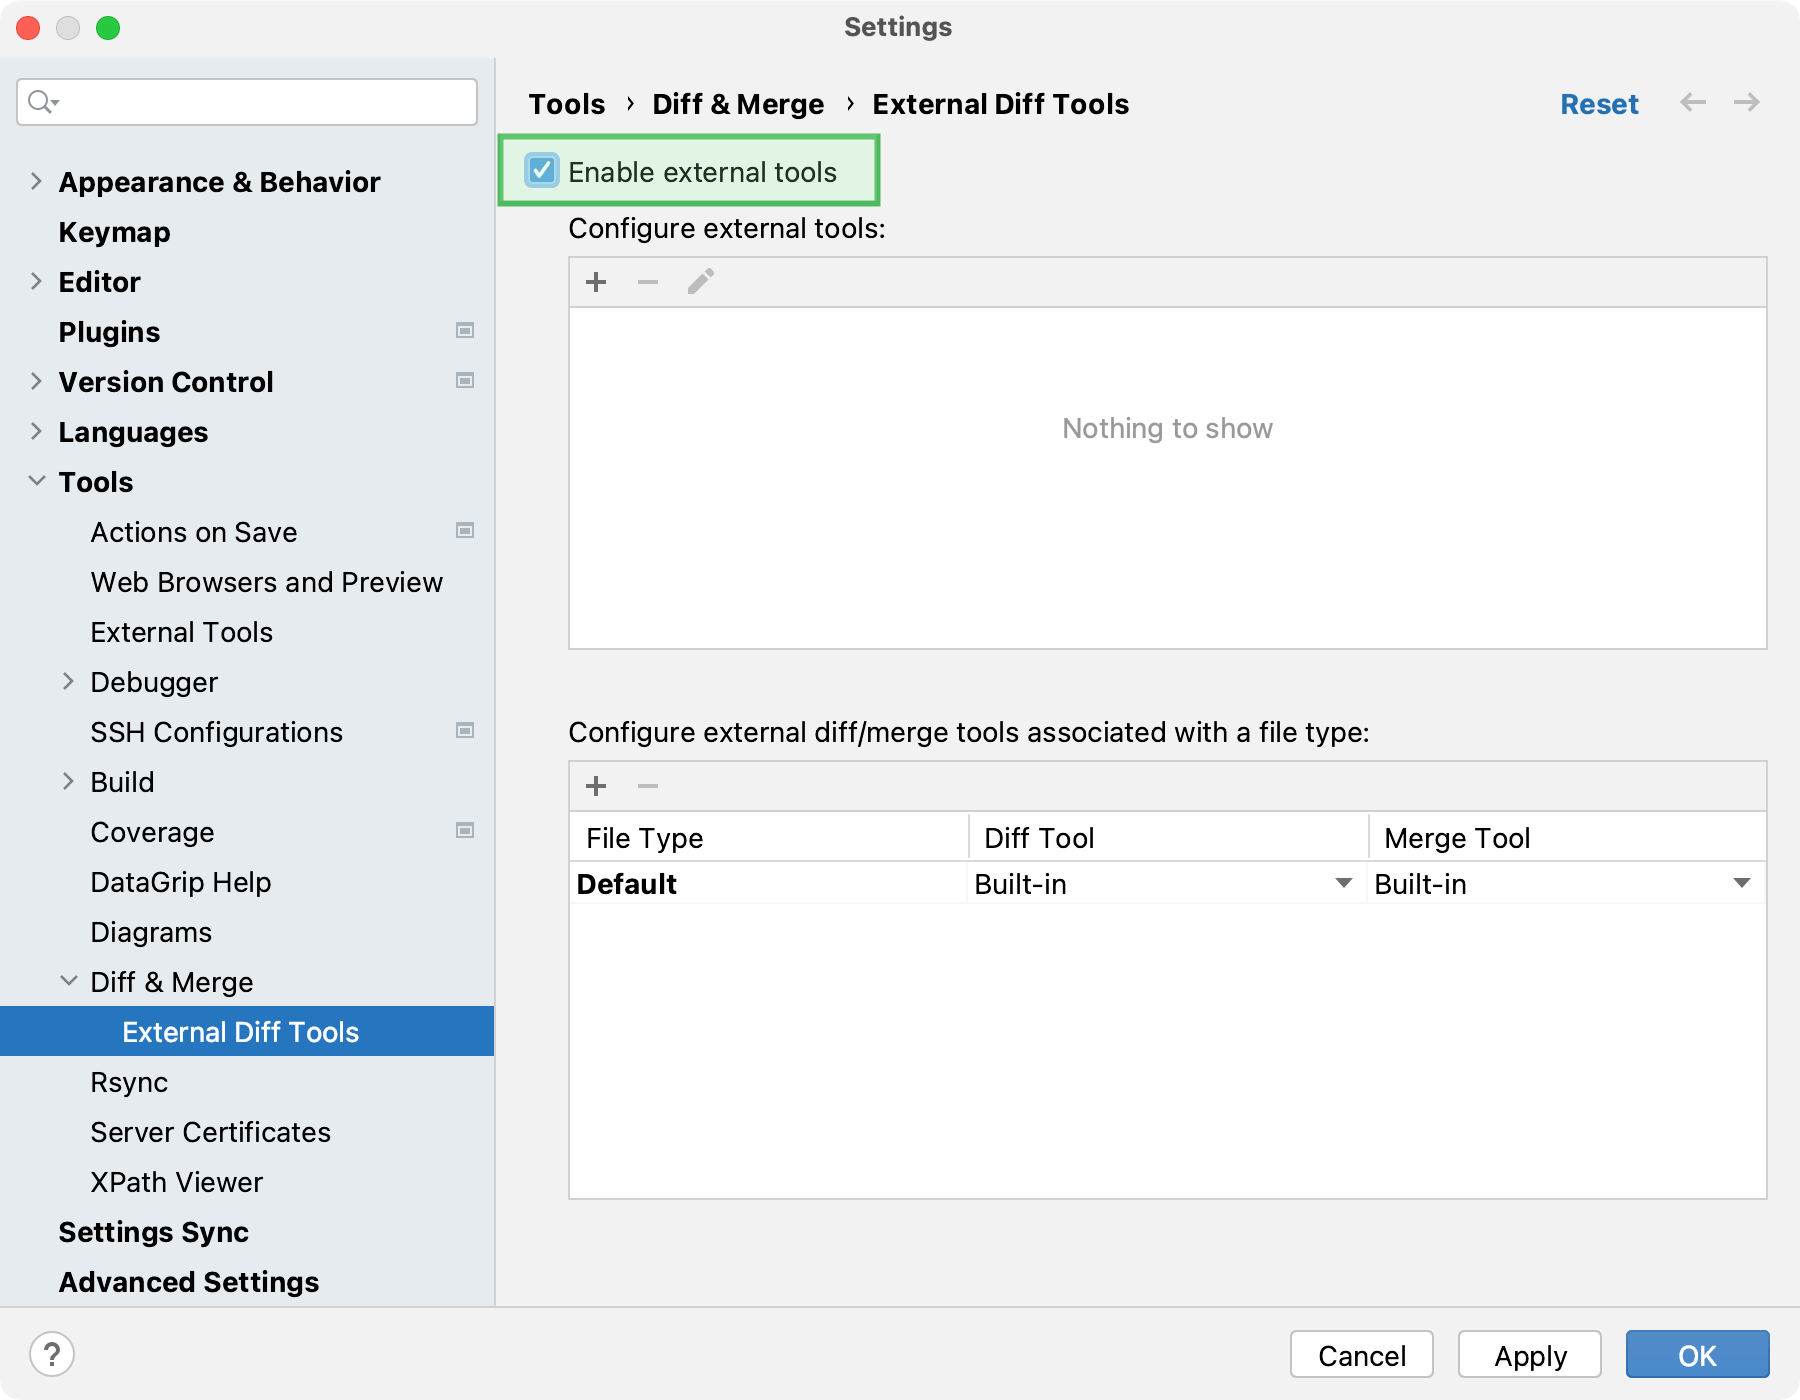 Enable external diff tools